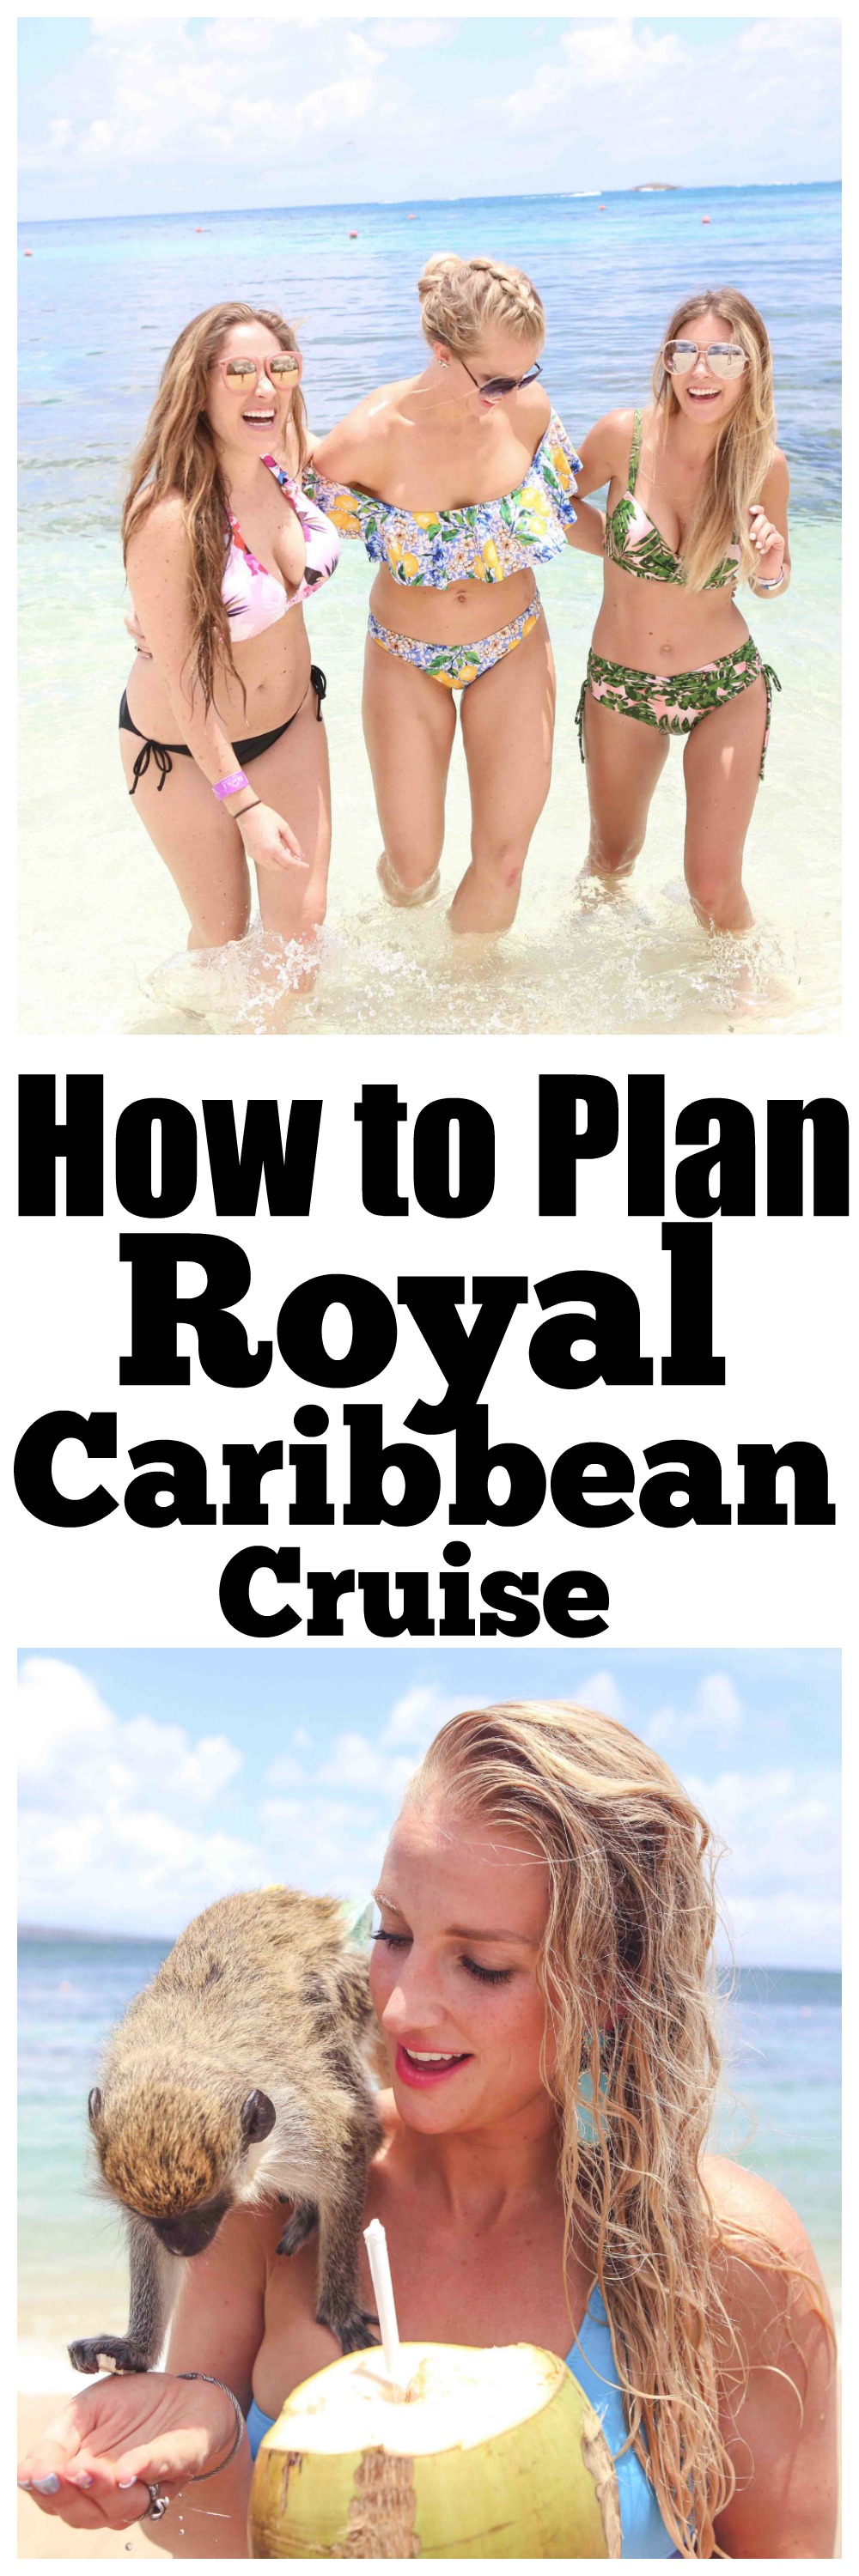 The Ultimate Royal Caribbean Cruise Planner by Atlanta blogger Happily Hughes